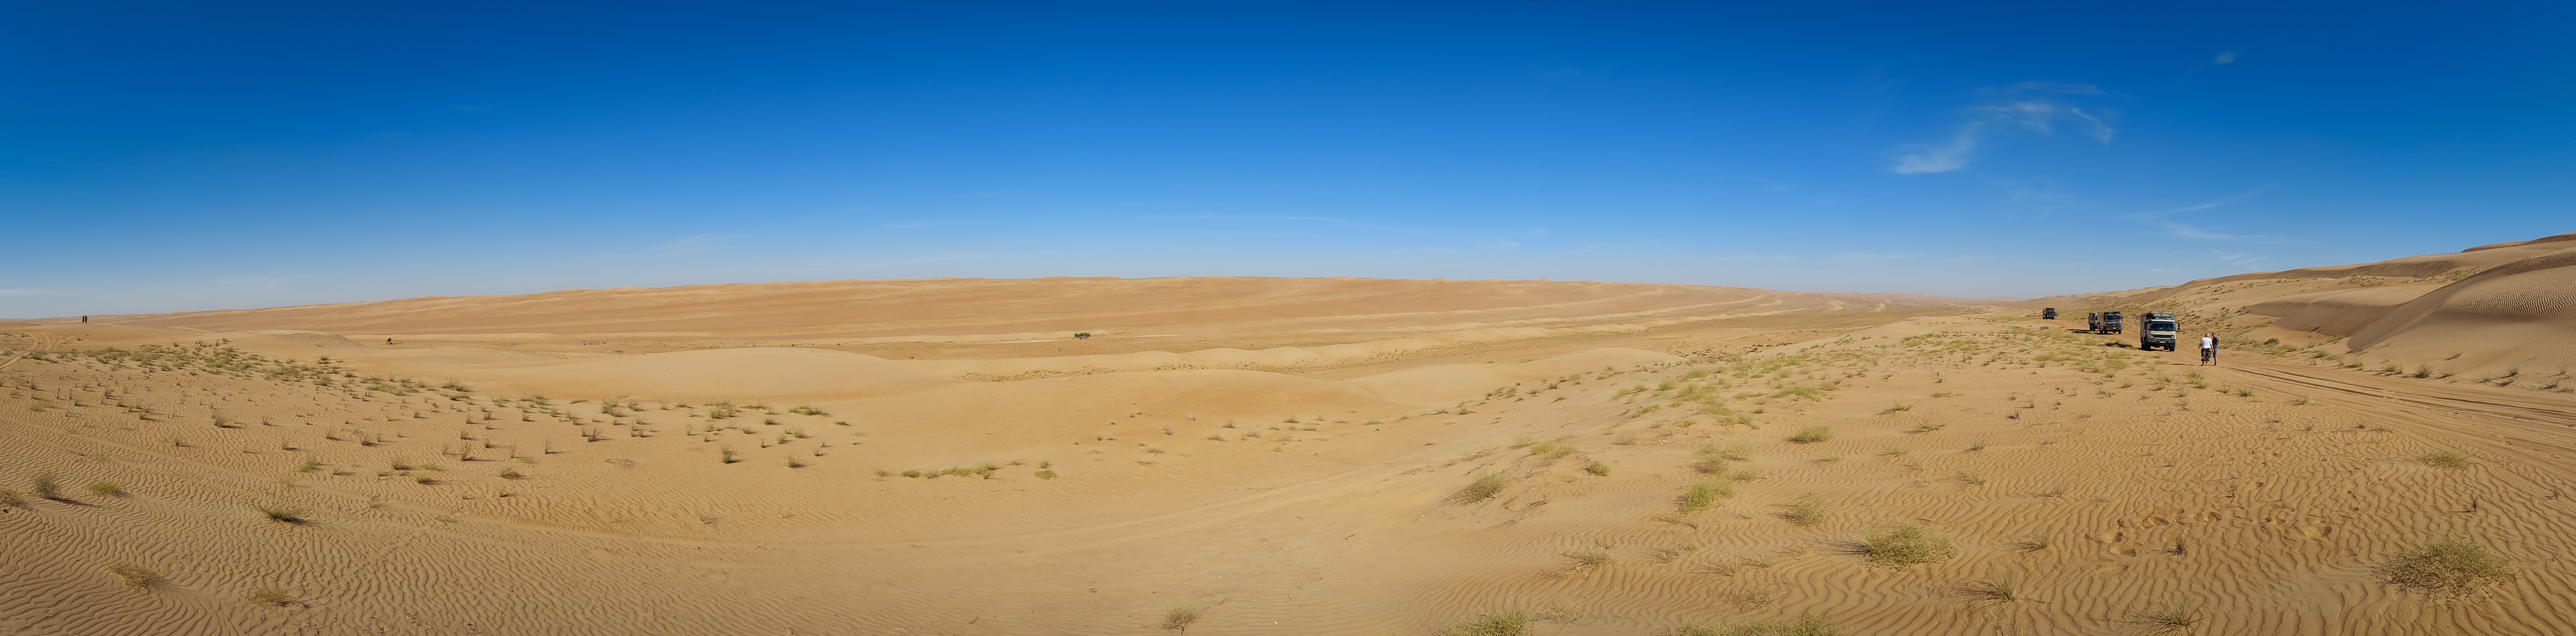 <span  class="uc_style_uc_tiles_grid_image_elementor_uc_items_attribute_title" style="color:#ffffff;">Wahiba Sands</span>